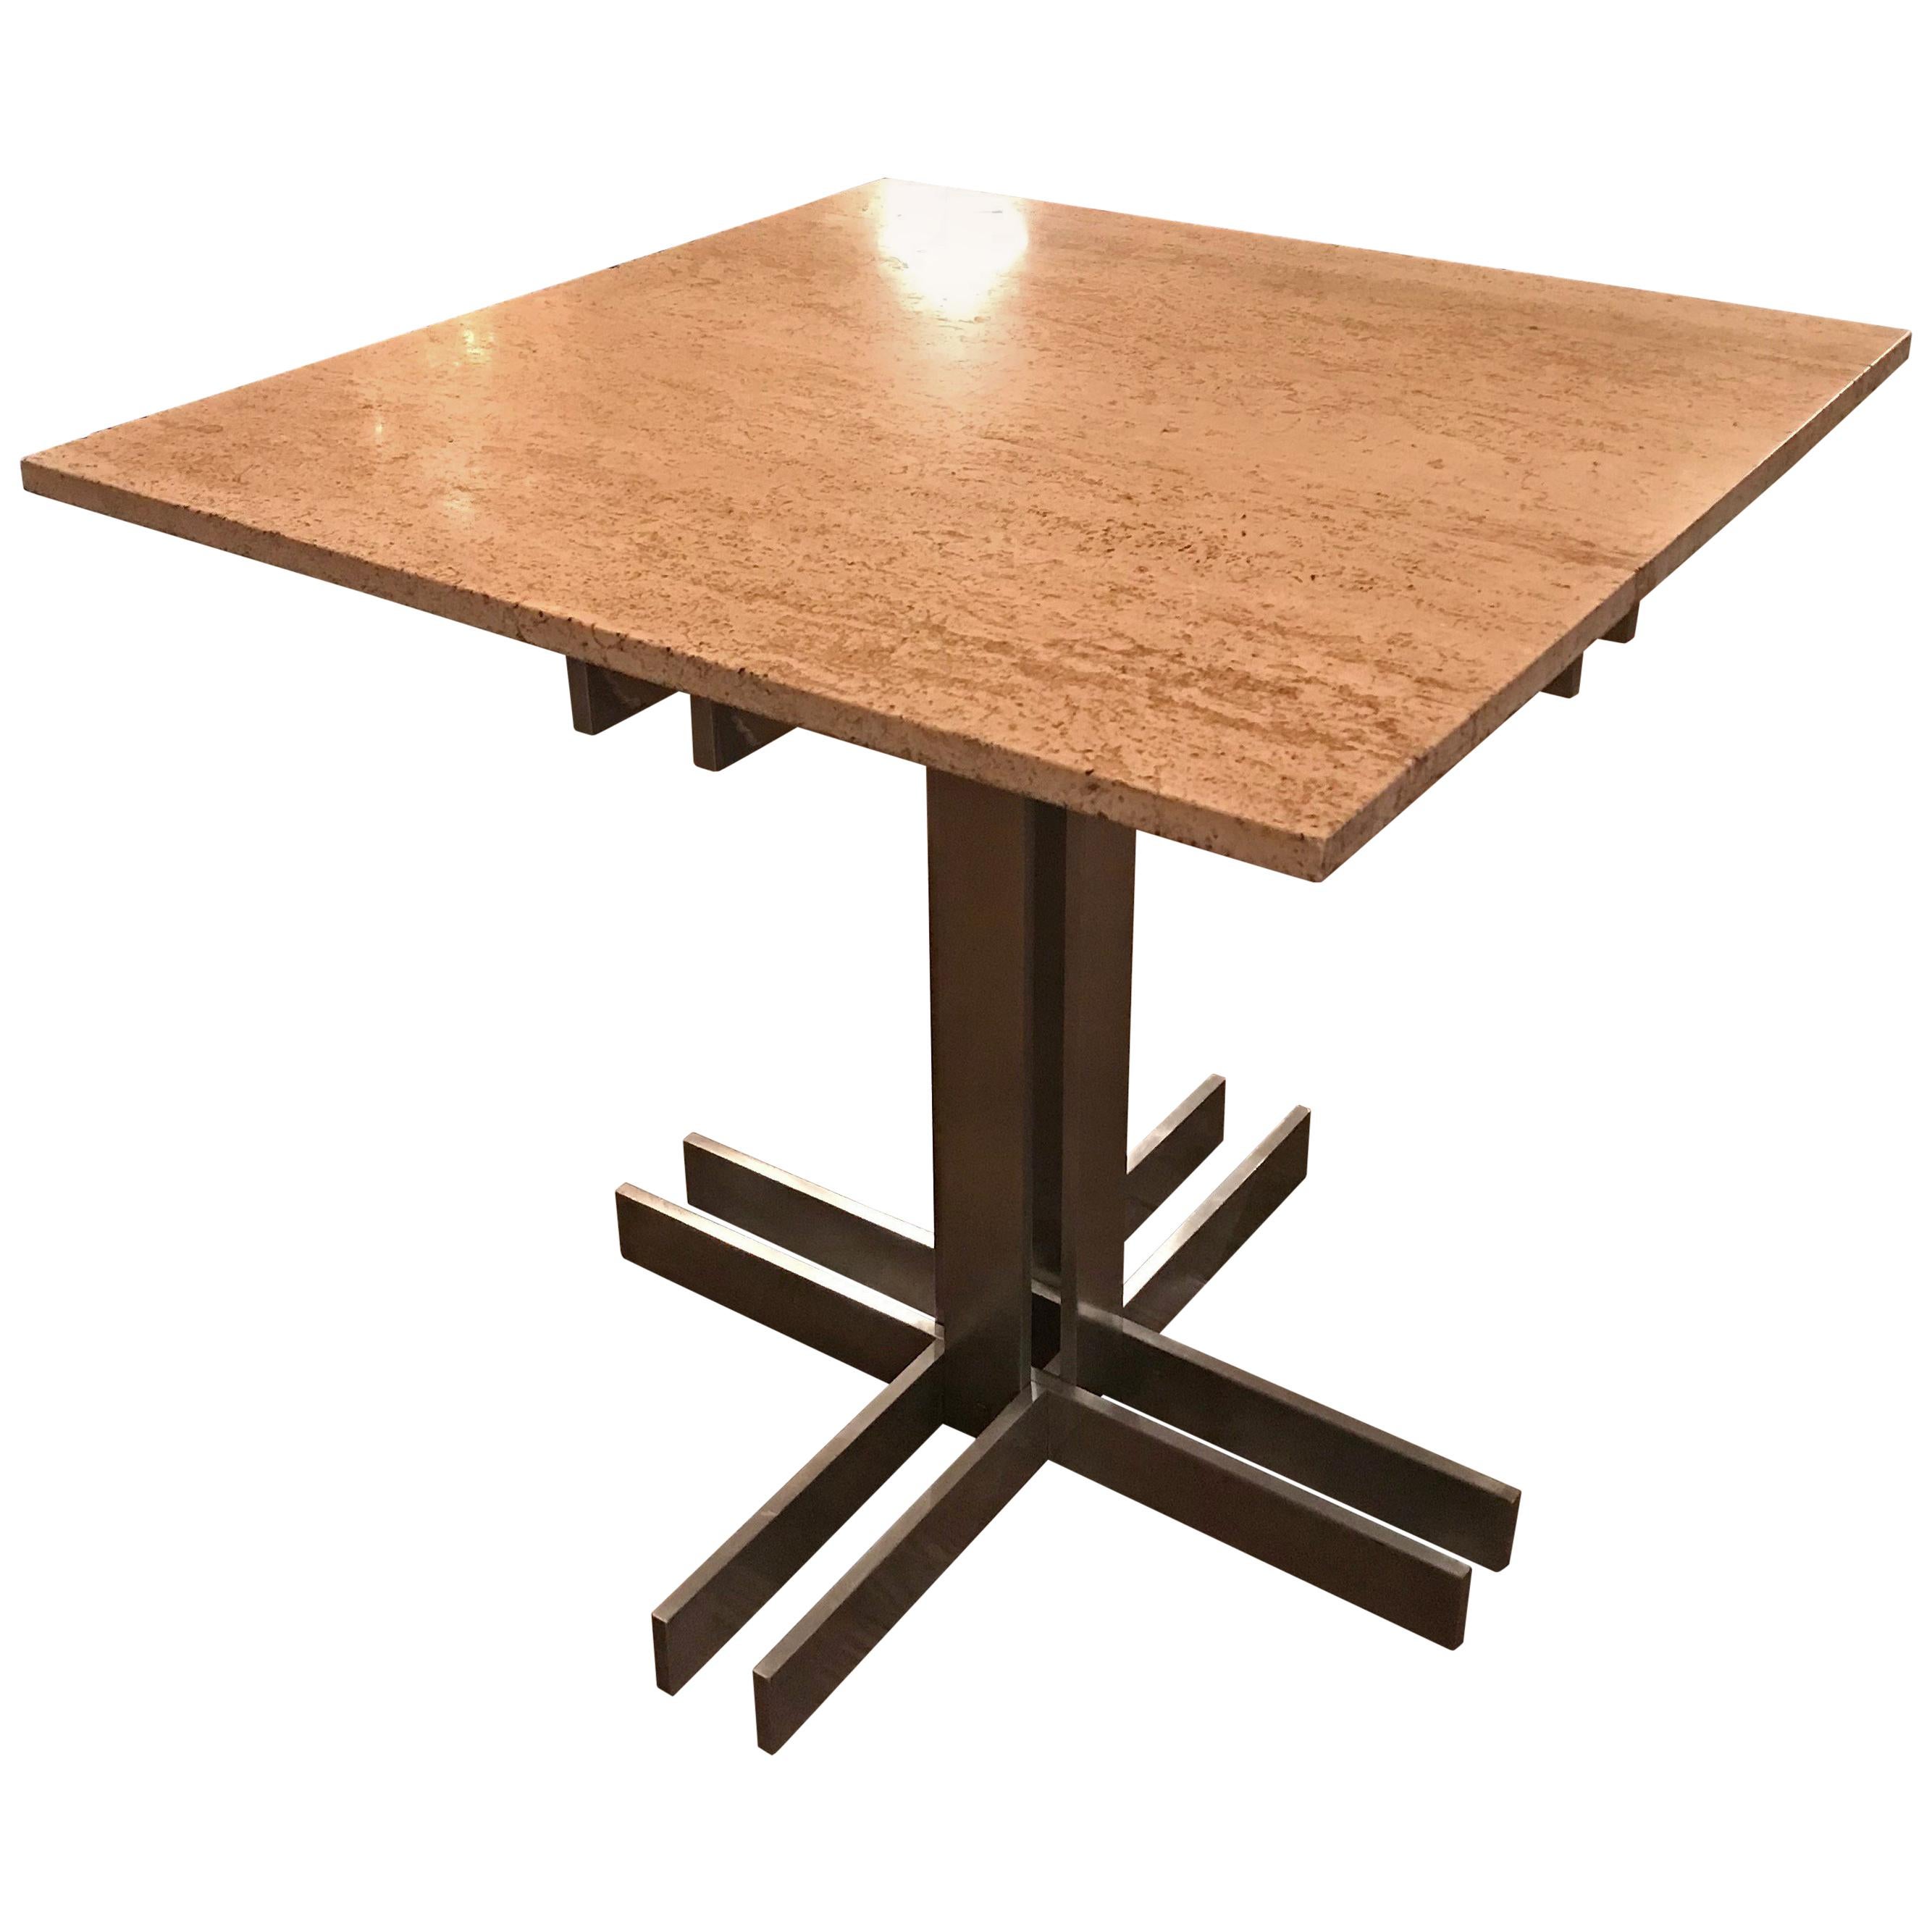 Postmodern Travertine Table with Architectural Aluminum Base